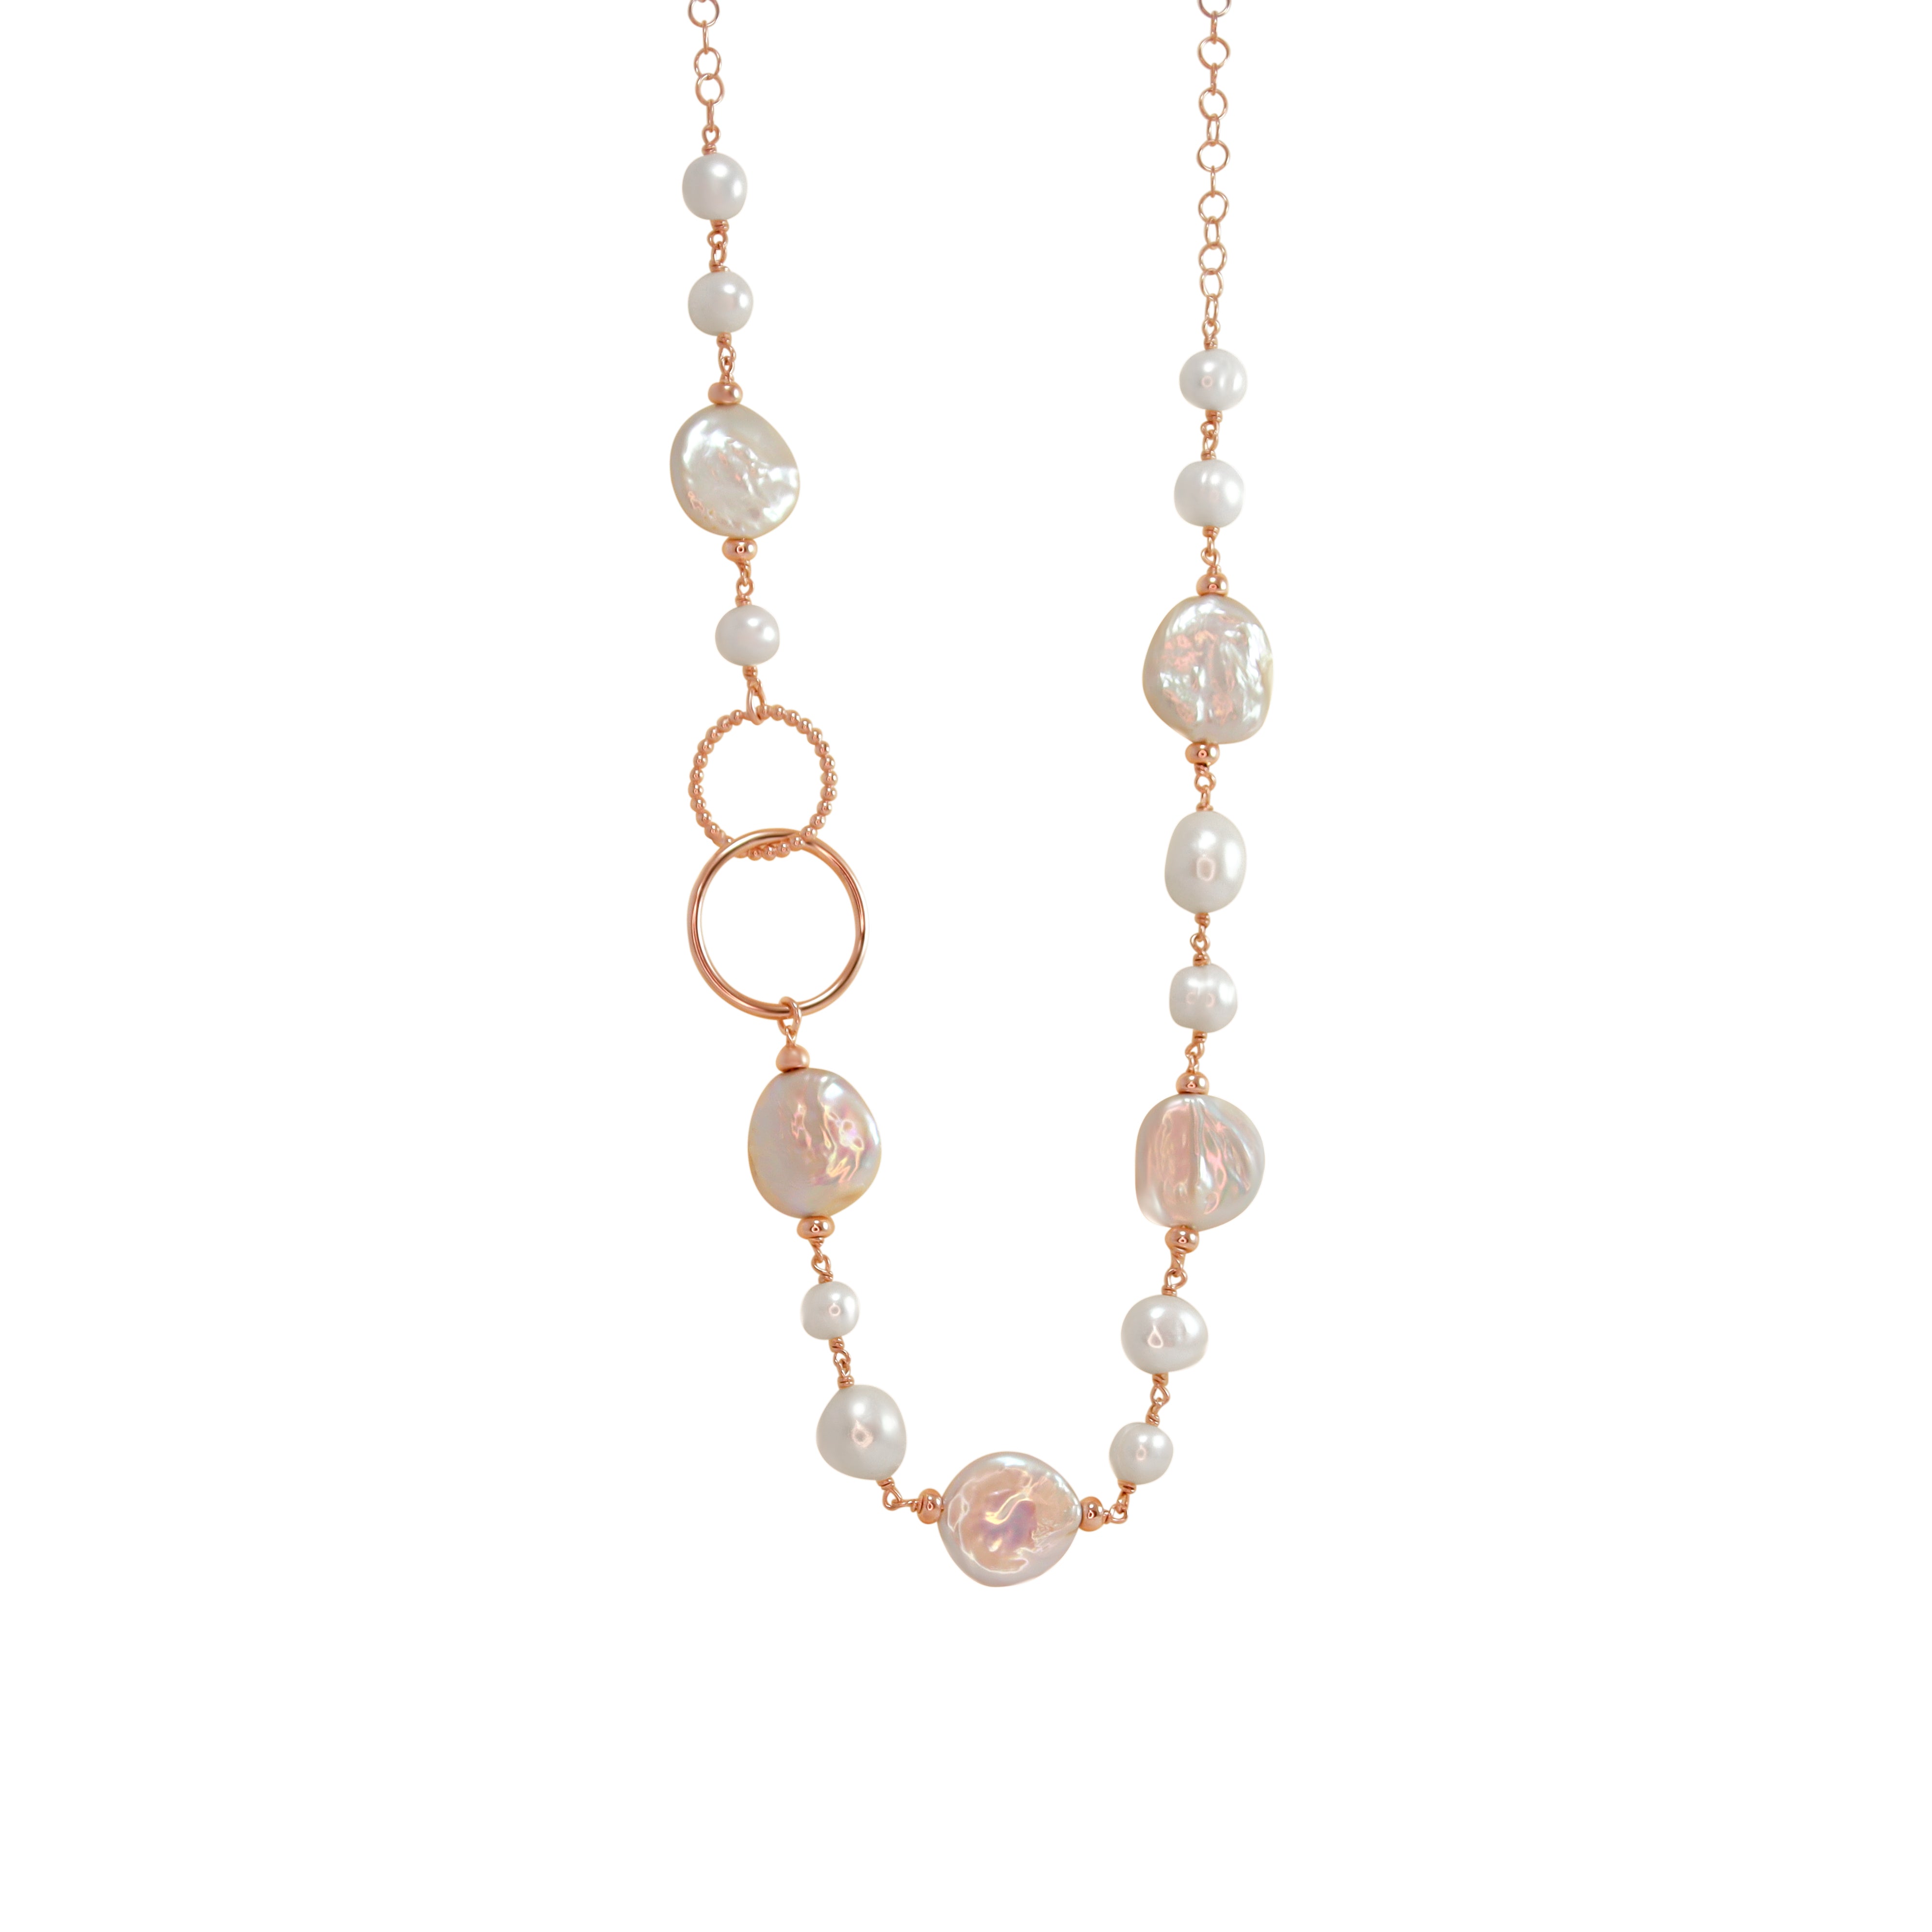 Pearl, Coin Pearl & Circle Link Necklace - 48cm